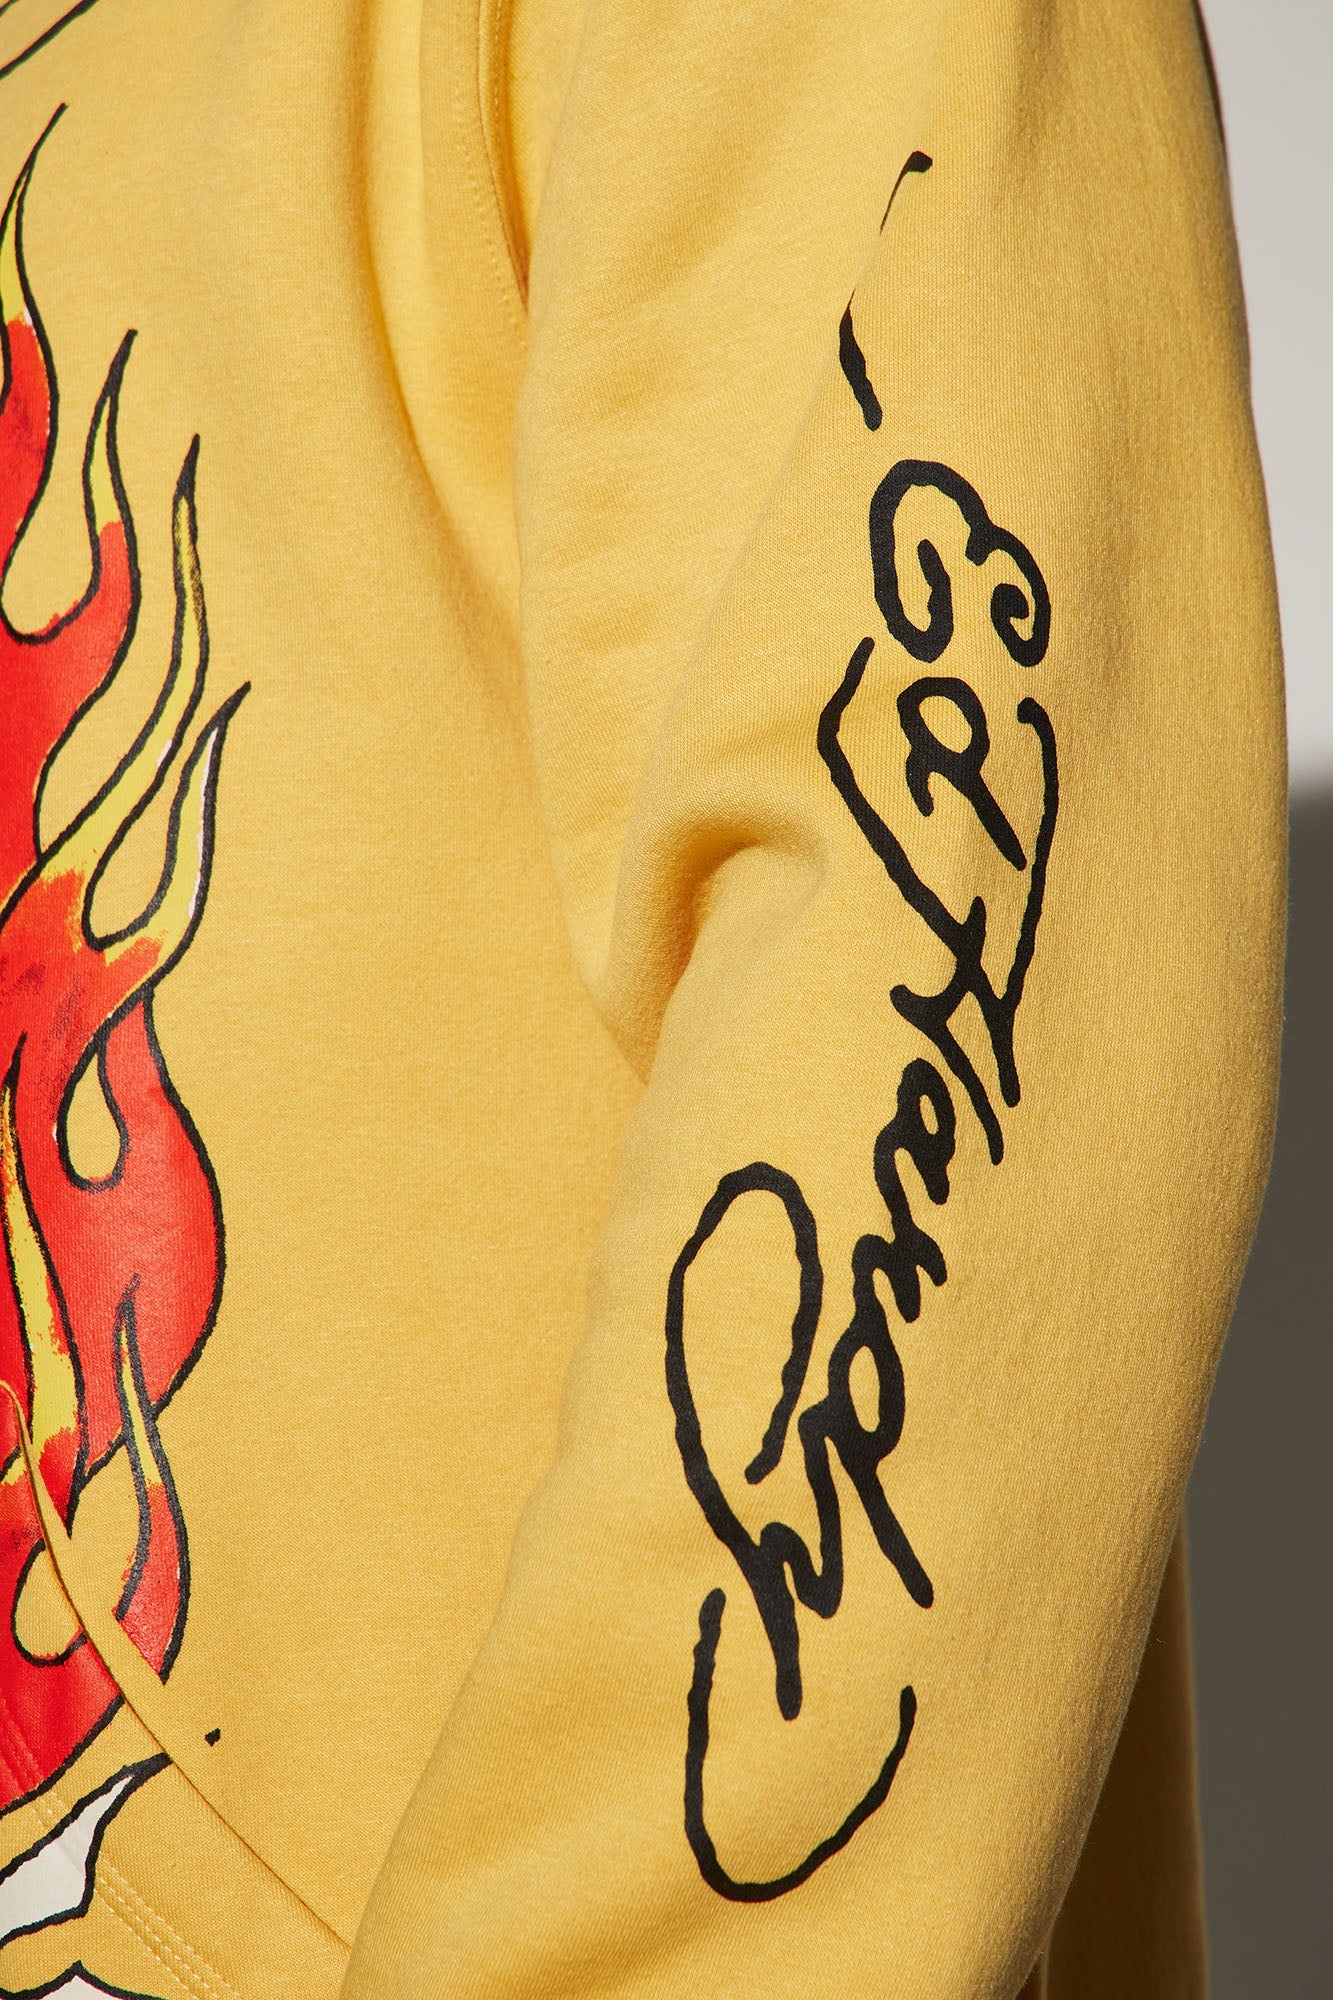 Trendy and Fierce: Ed Hardy Fire Tiger Hoodie in Yellow